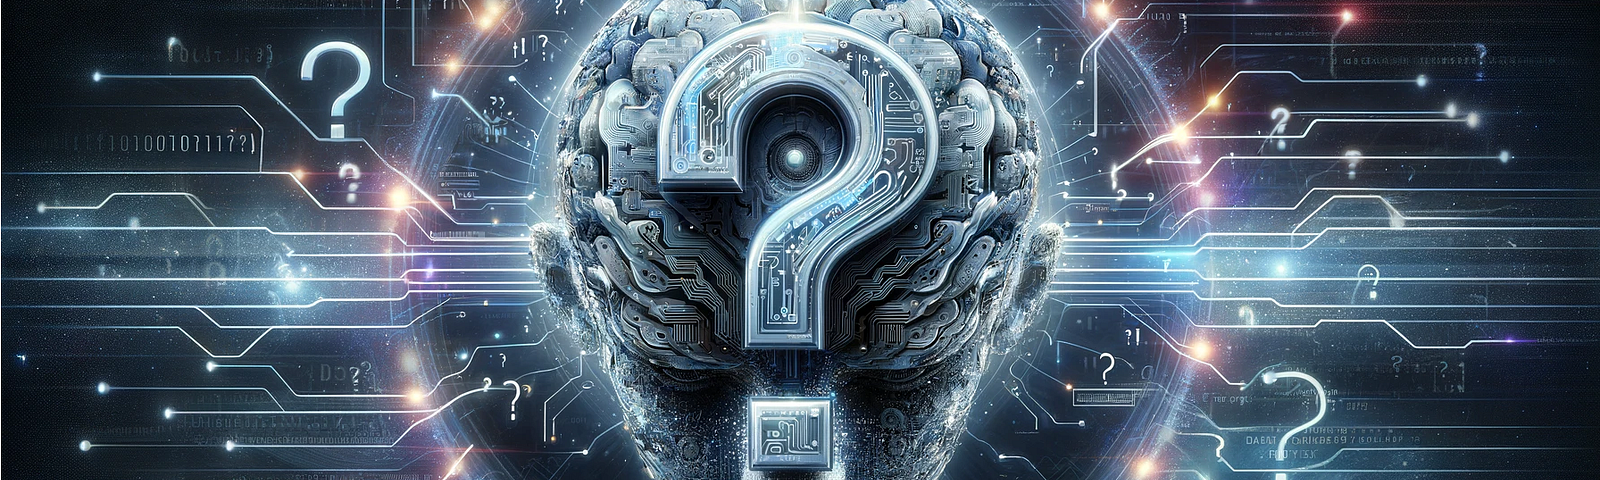 Image generated by DALL-E 3 in 2023: A cyber-techno figure shaped like a human head with a giant question mark on top, against a background of miscellaneous circuitry.